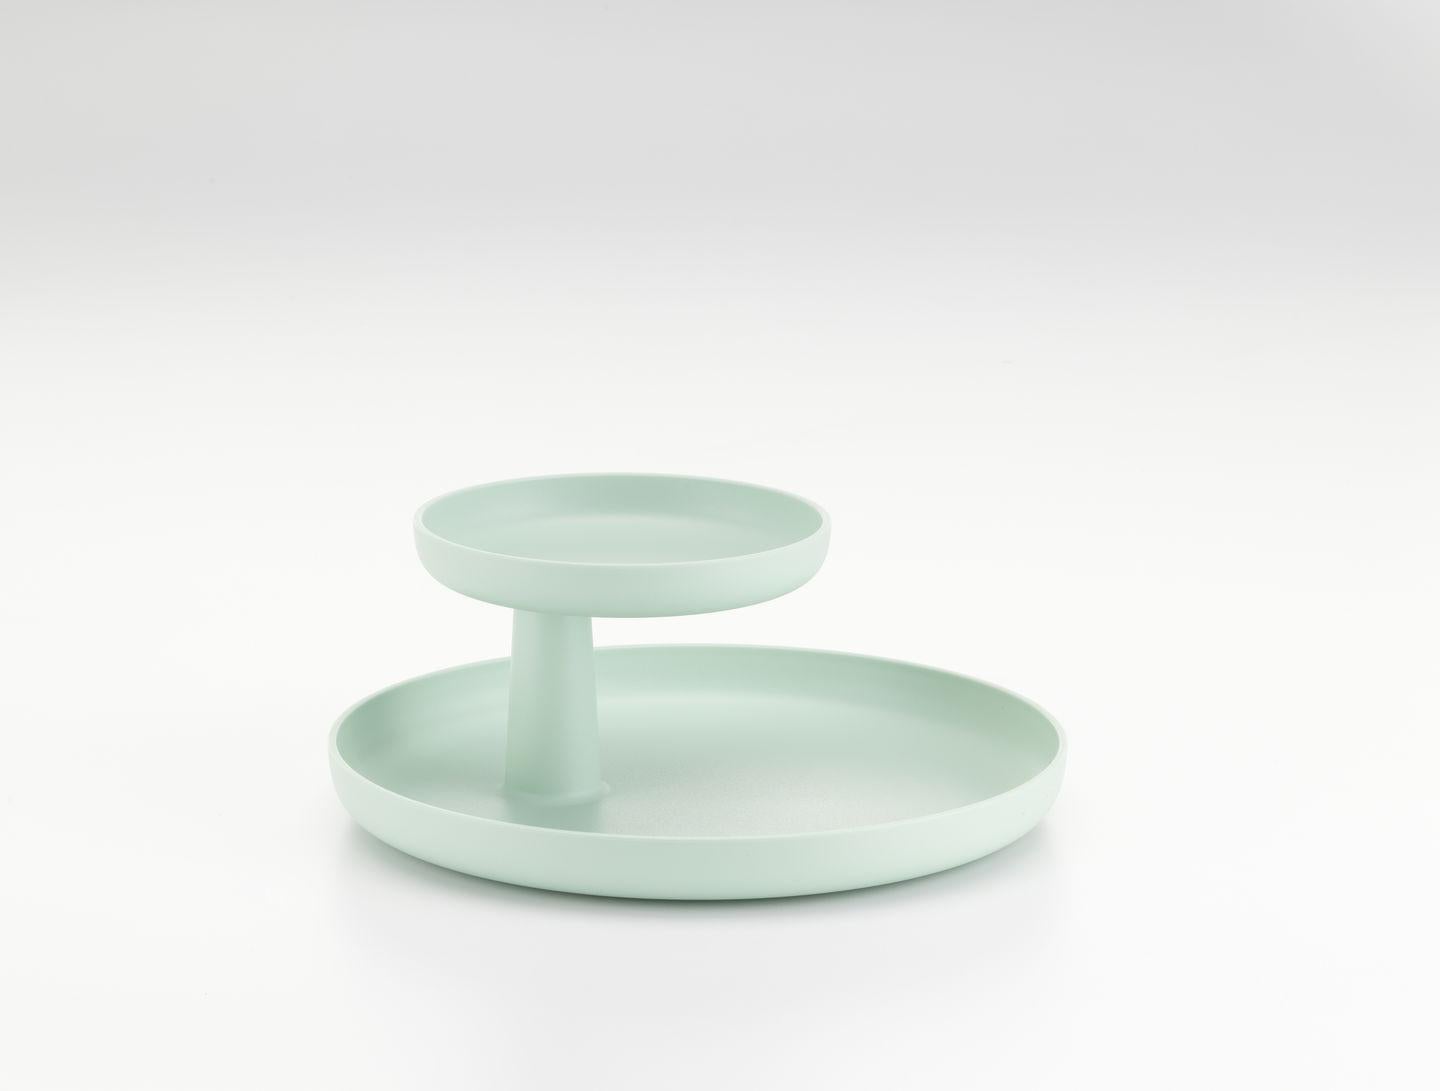 Tray designed by Jasper Morrison in 2014.
Manufactured by Vitra, Switzerland.

Decorative storage options do not just keep offices, meeting areas, lobbies and lounges tidy, they also contribute to the appeal of a setting. The Rotary Tray by